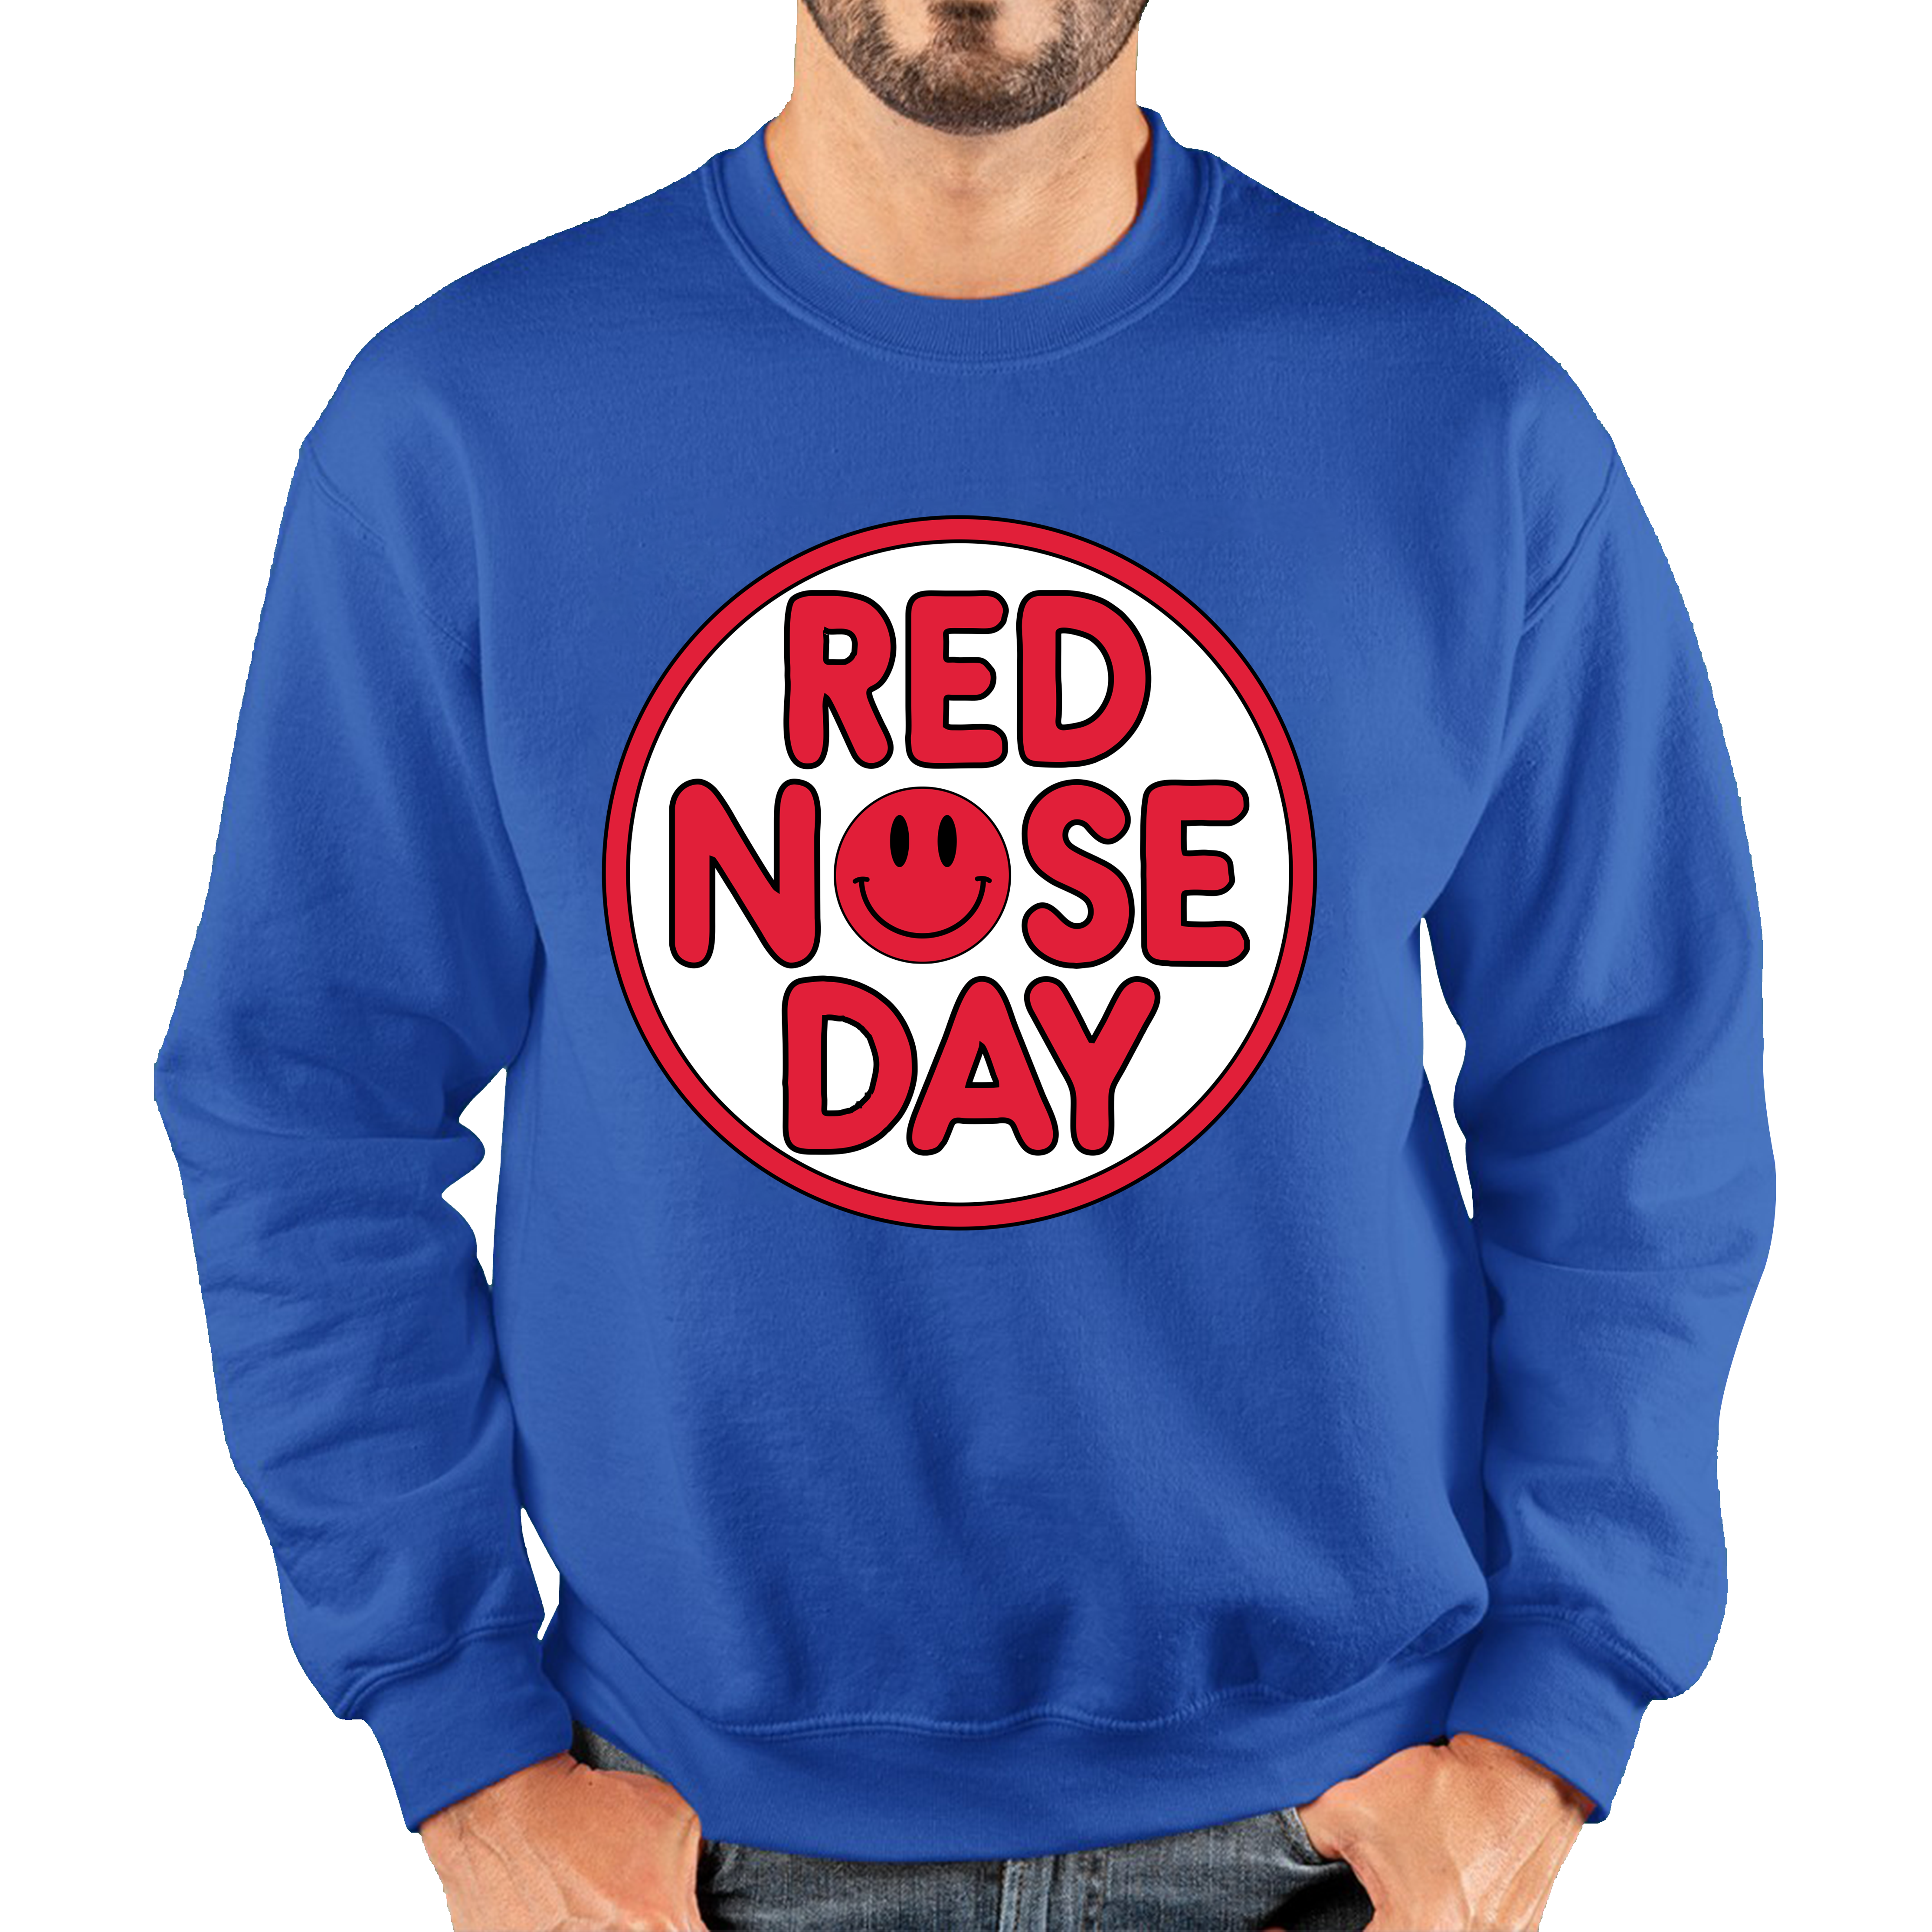 Smiley Face Red Nose Day Adult Sweatshirt. 50% Goes To Charity